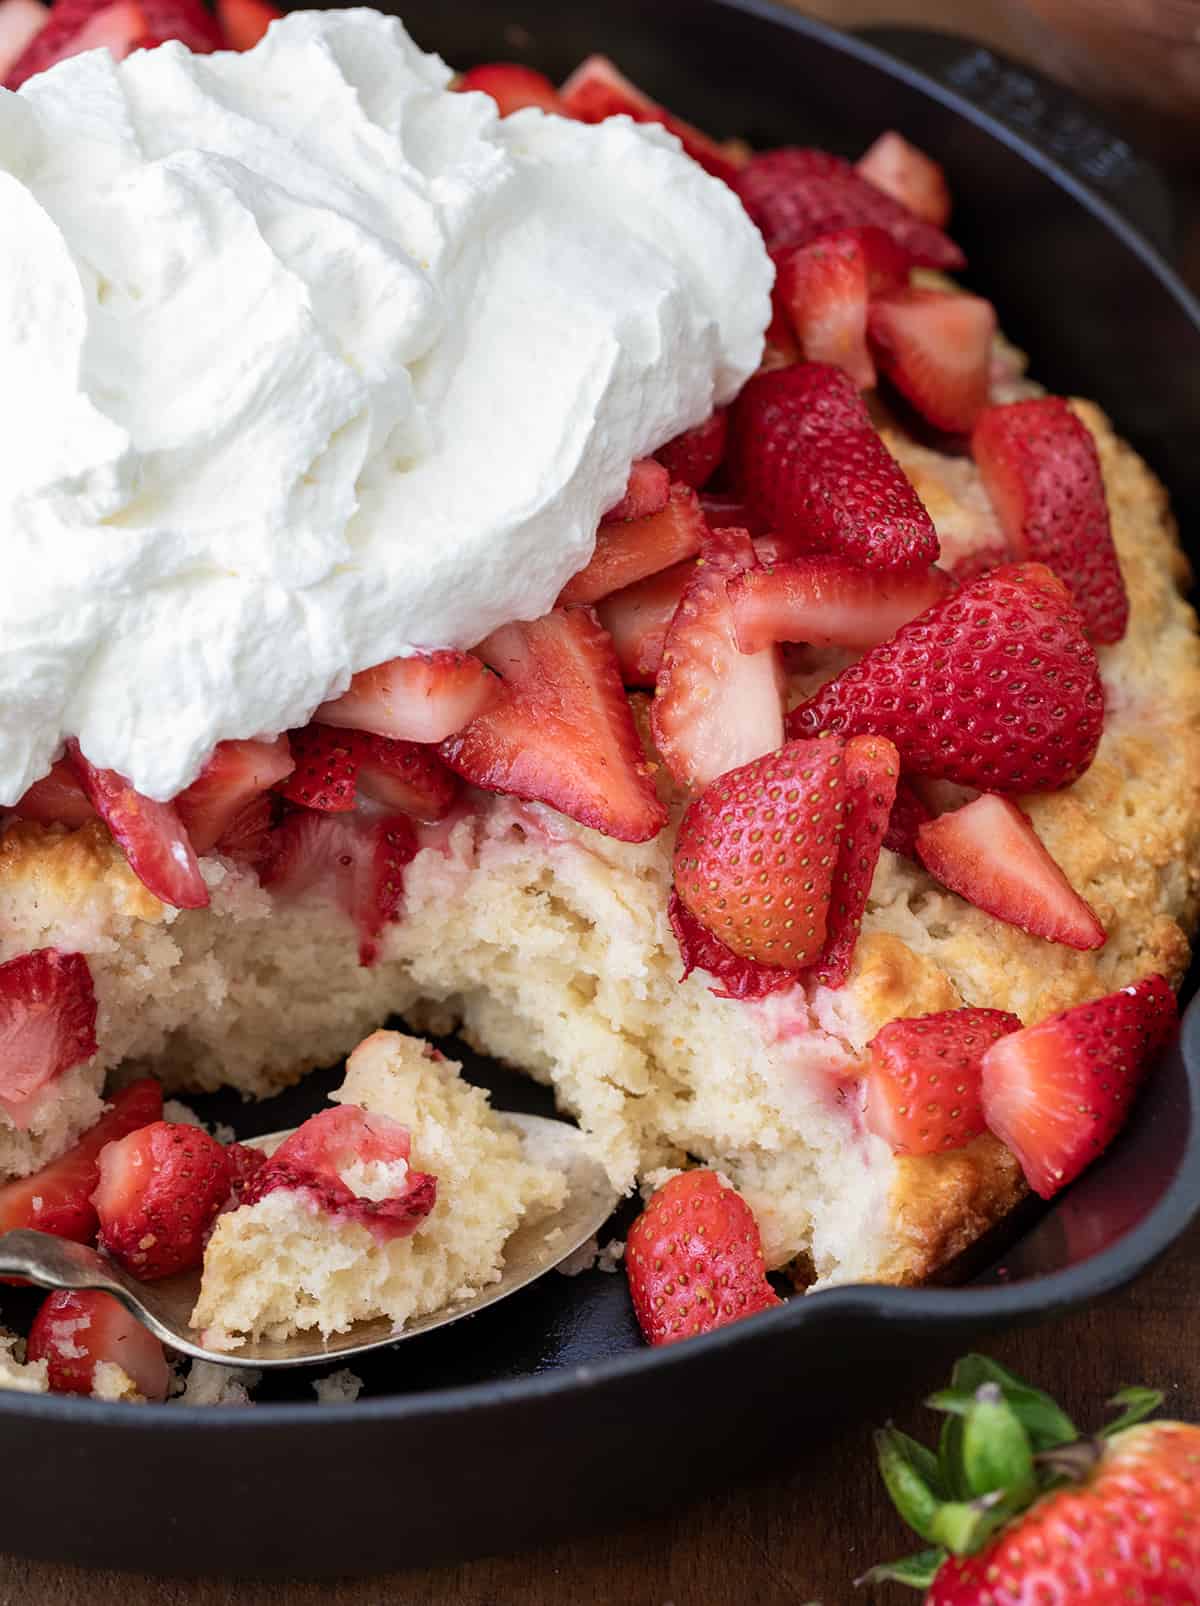 Close up of the inside of Skillet Strawberry Shortcake showing tender texture.